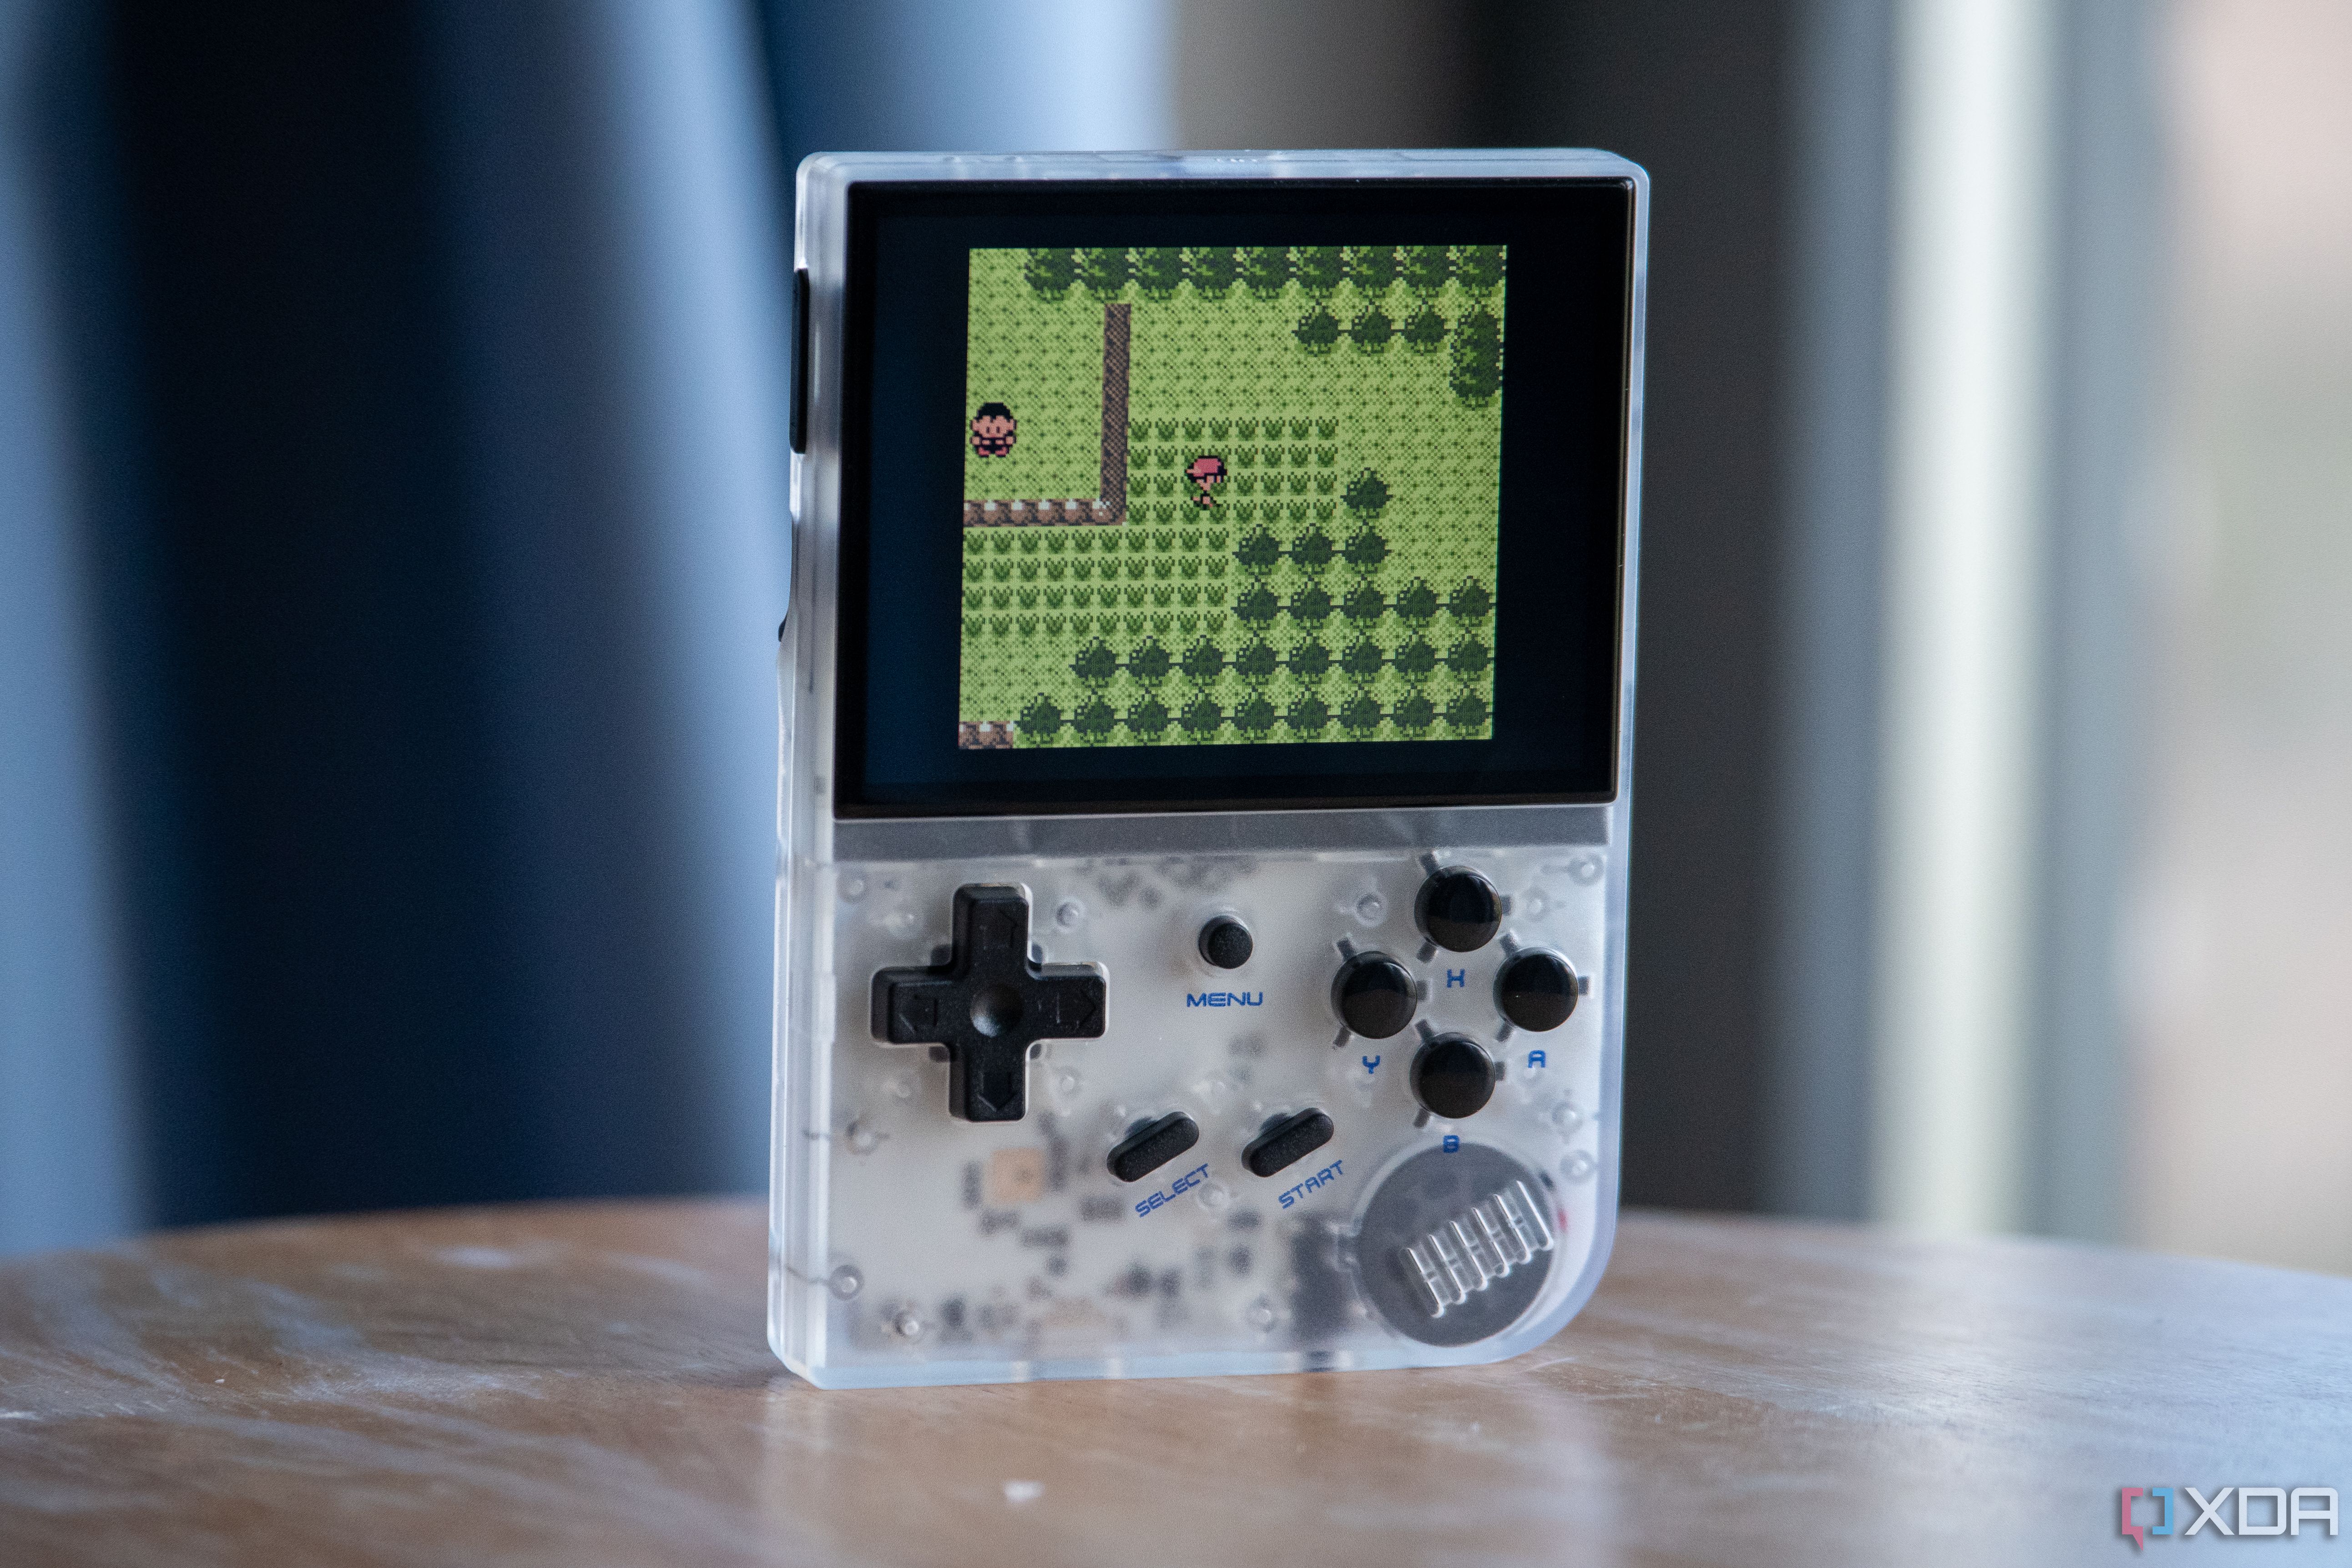 Anbernic RG35XX on a table, showing front buttons and Pokemon running on it